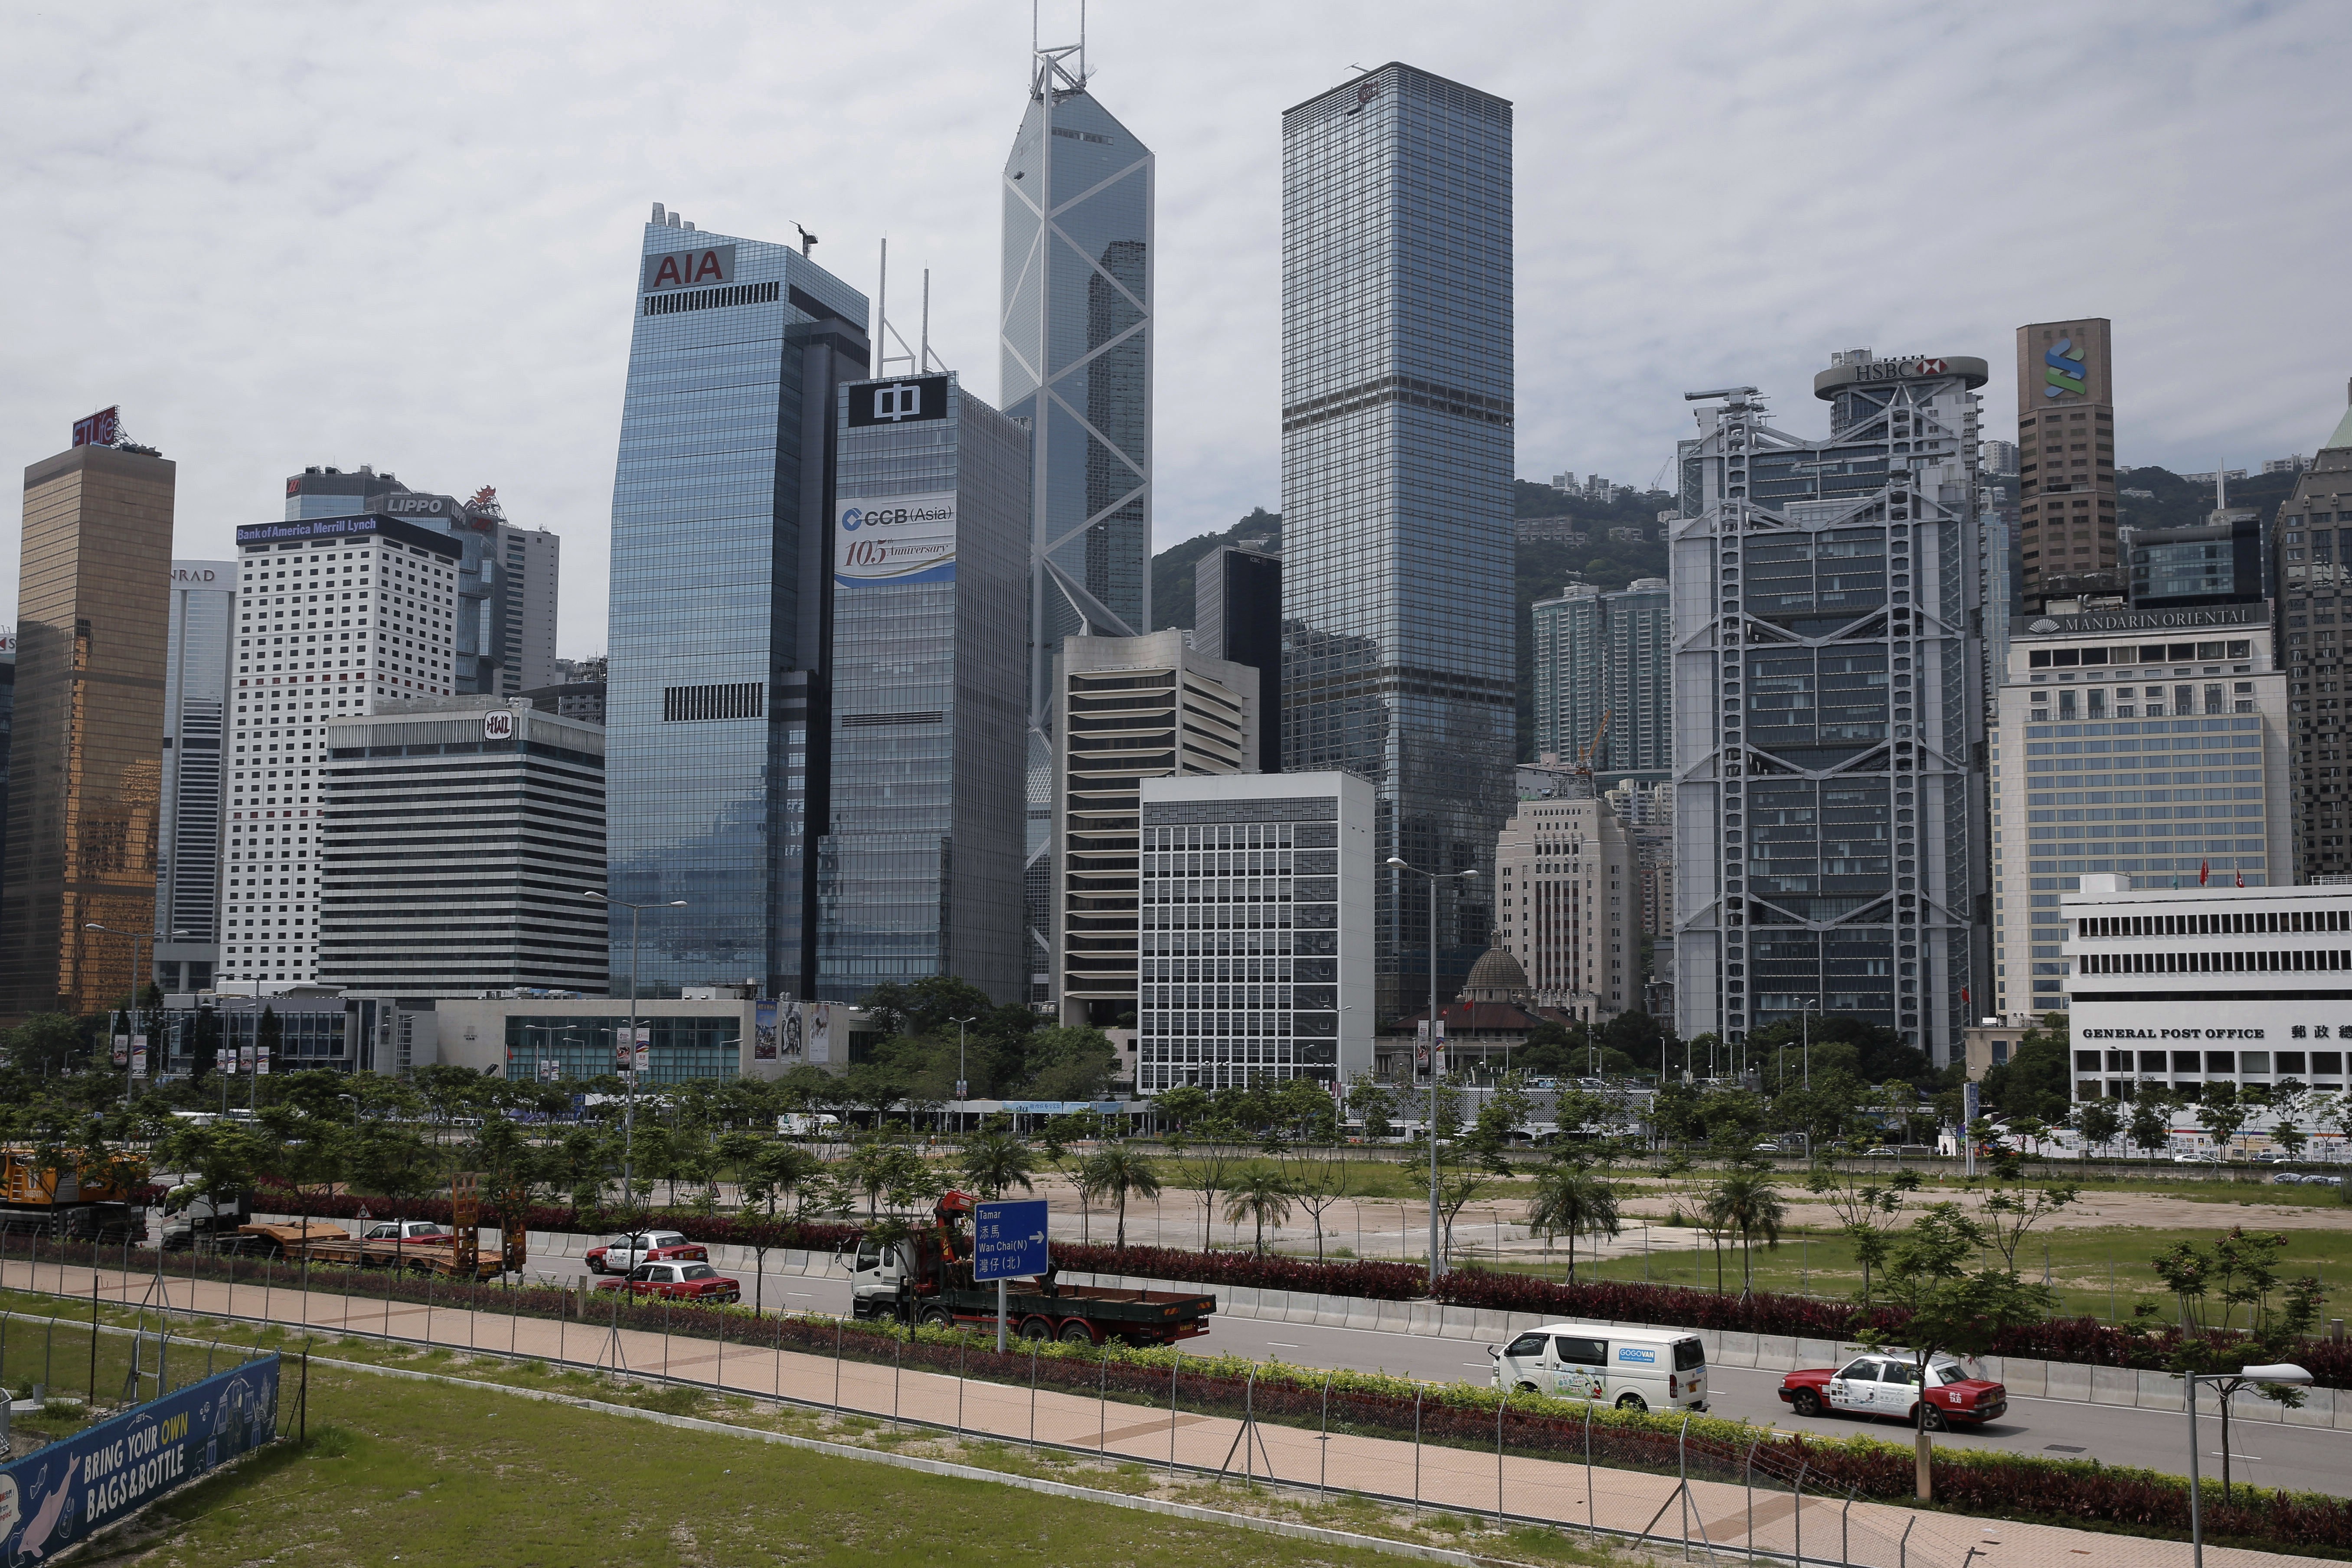 Annual surplus likely to be just shy of HK$160 billion by the end of financial year, source suggests, as pressure mounts on financial chief for budget giveaways